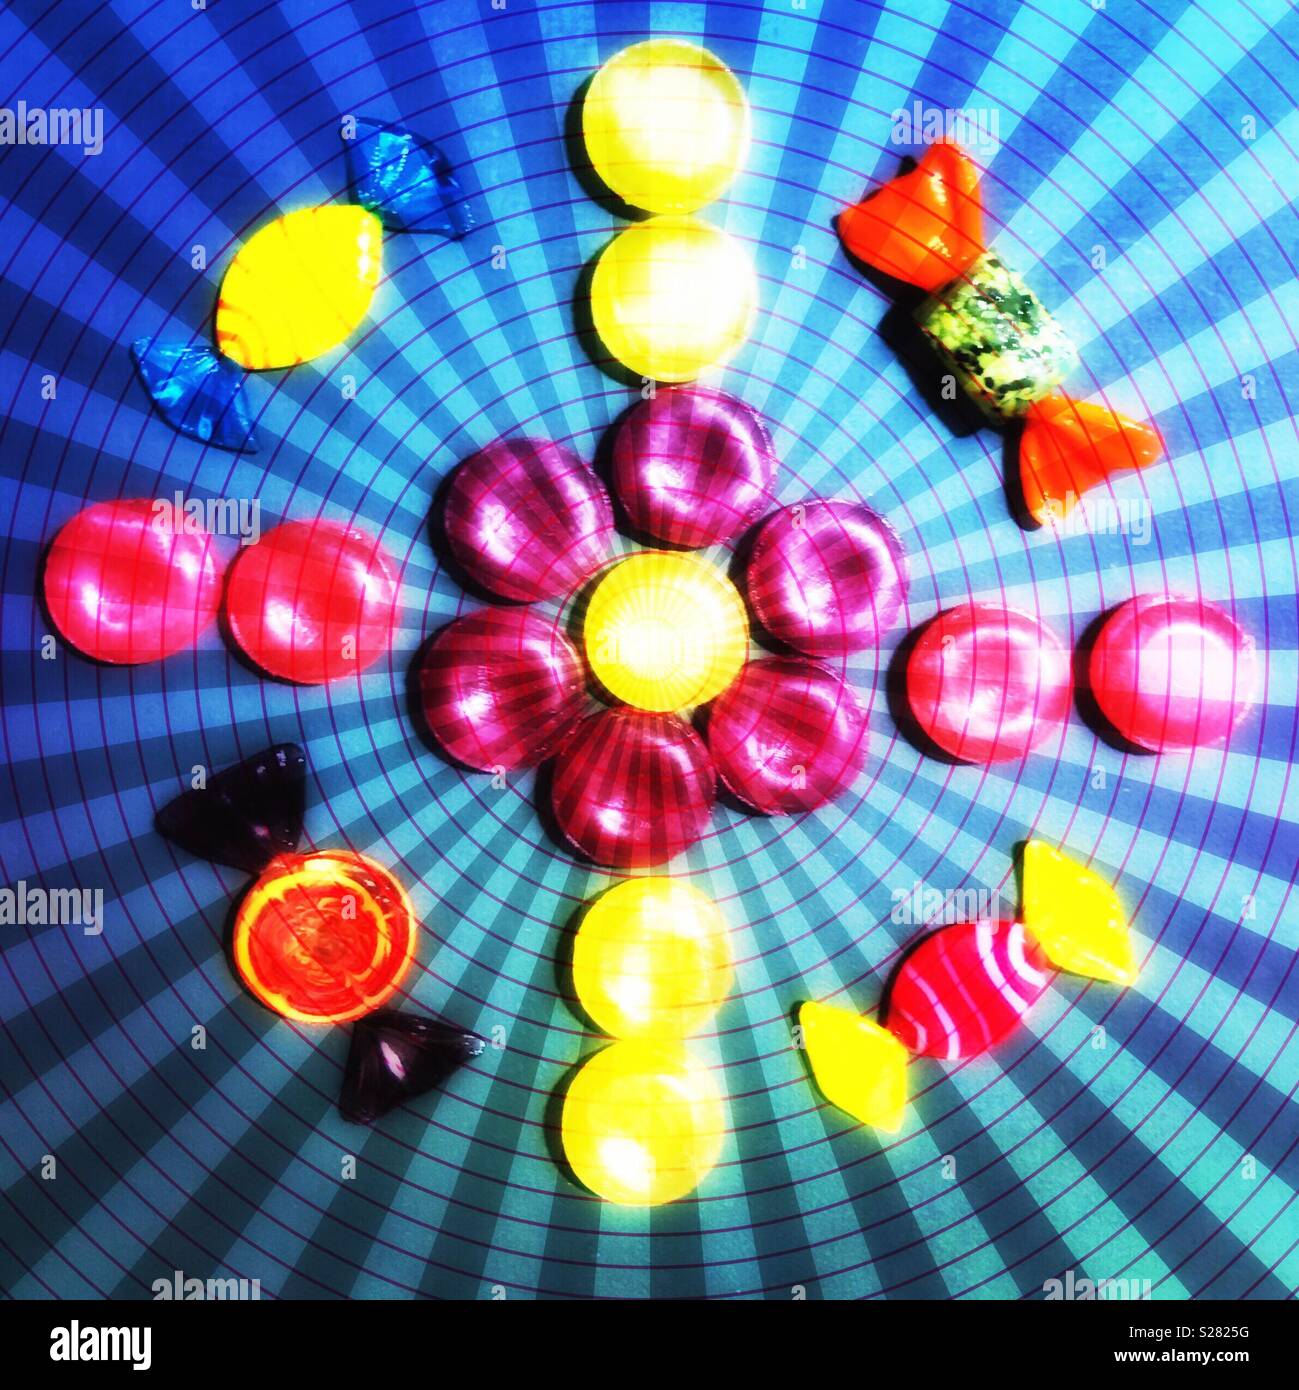 Candy design abstract Stock Photo